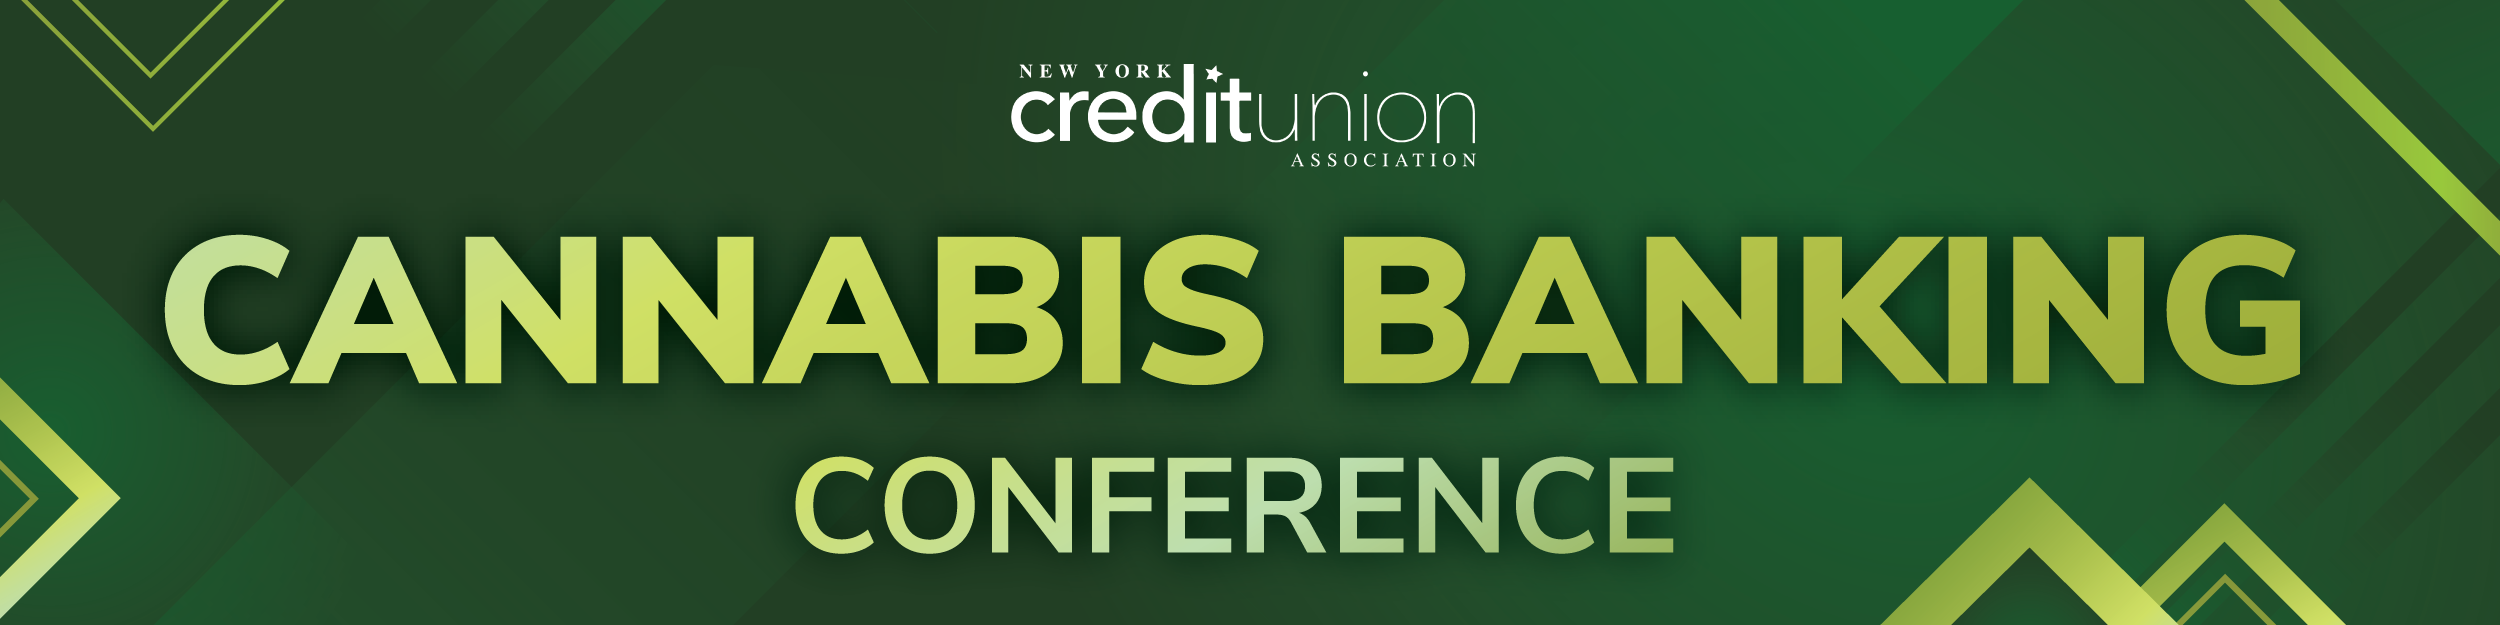 Cannabis Banking Conference.png